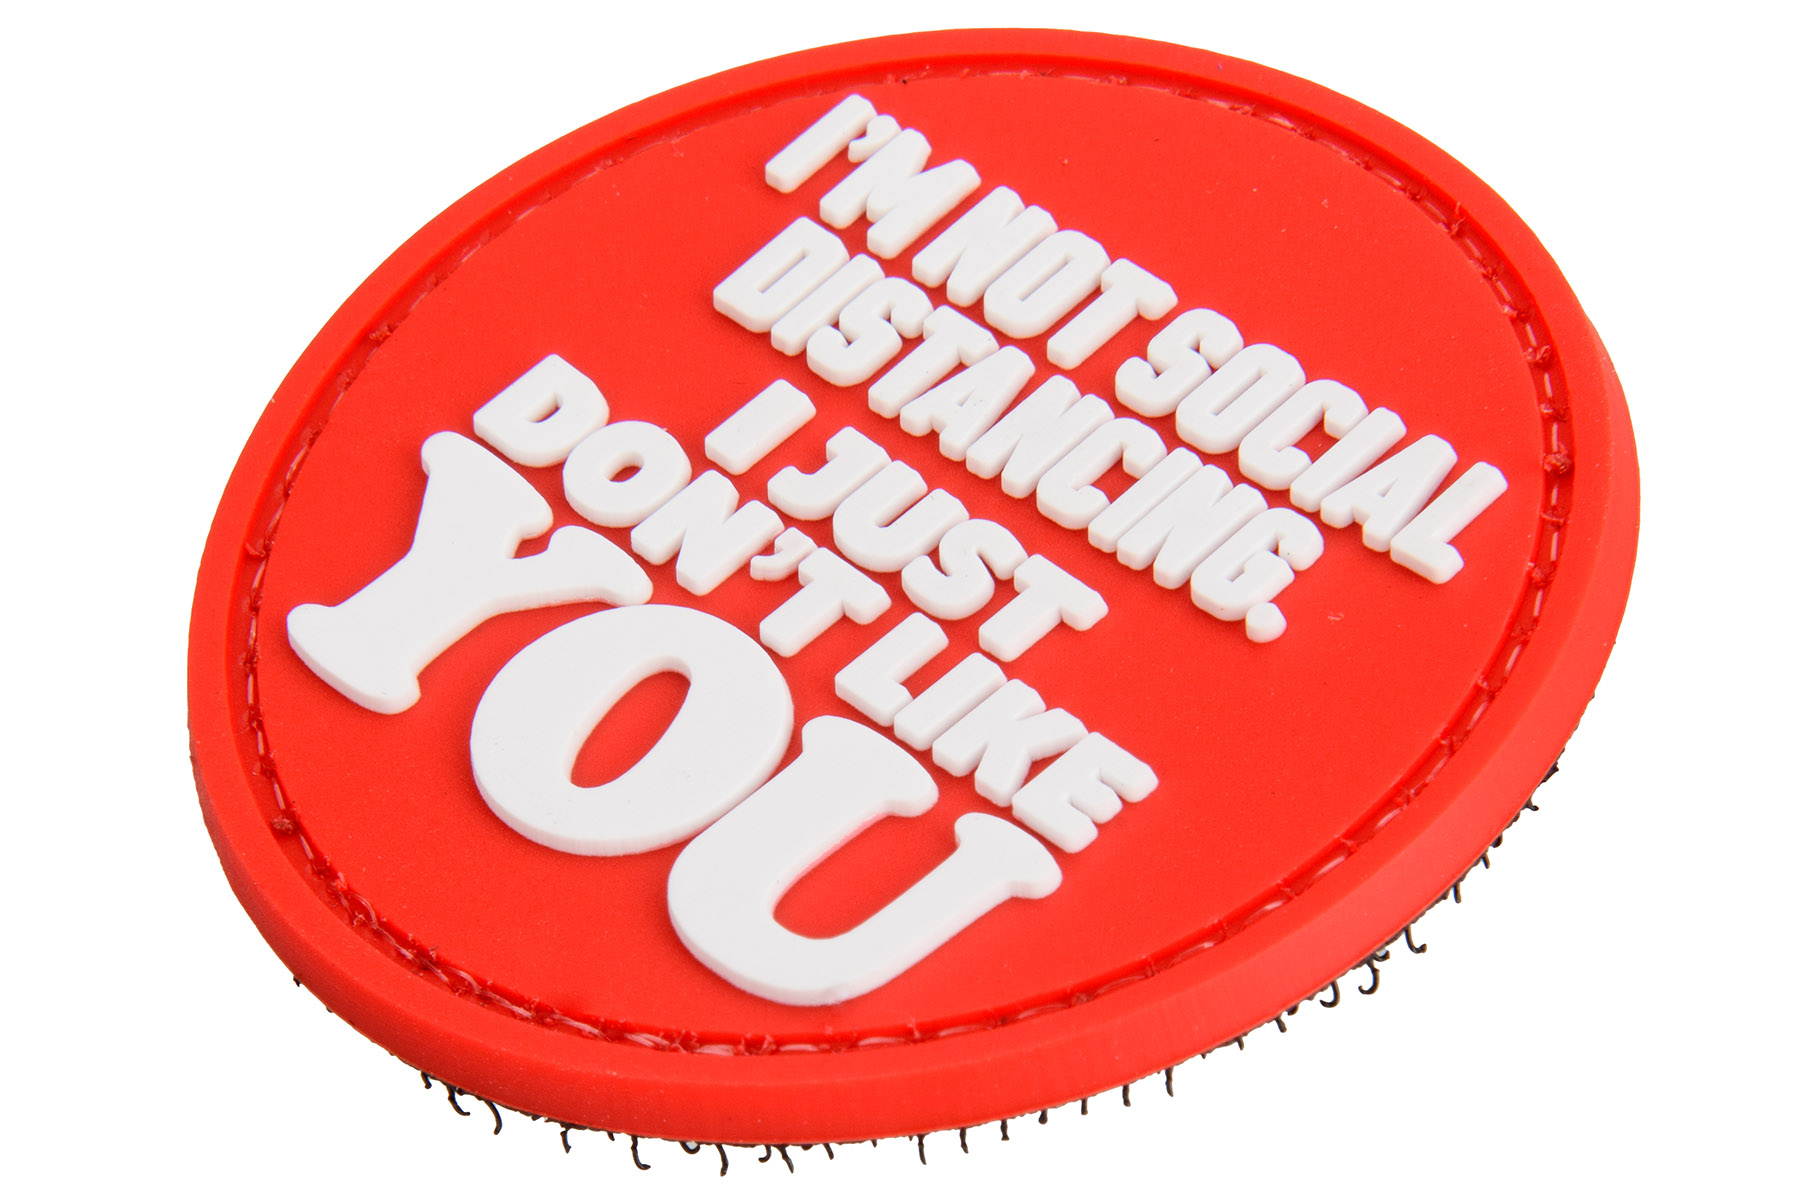 "I'm Not Social Distancing. I Just Don't Like YOU" PVC Morale Patch (Red)